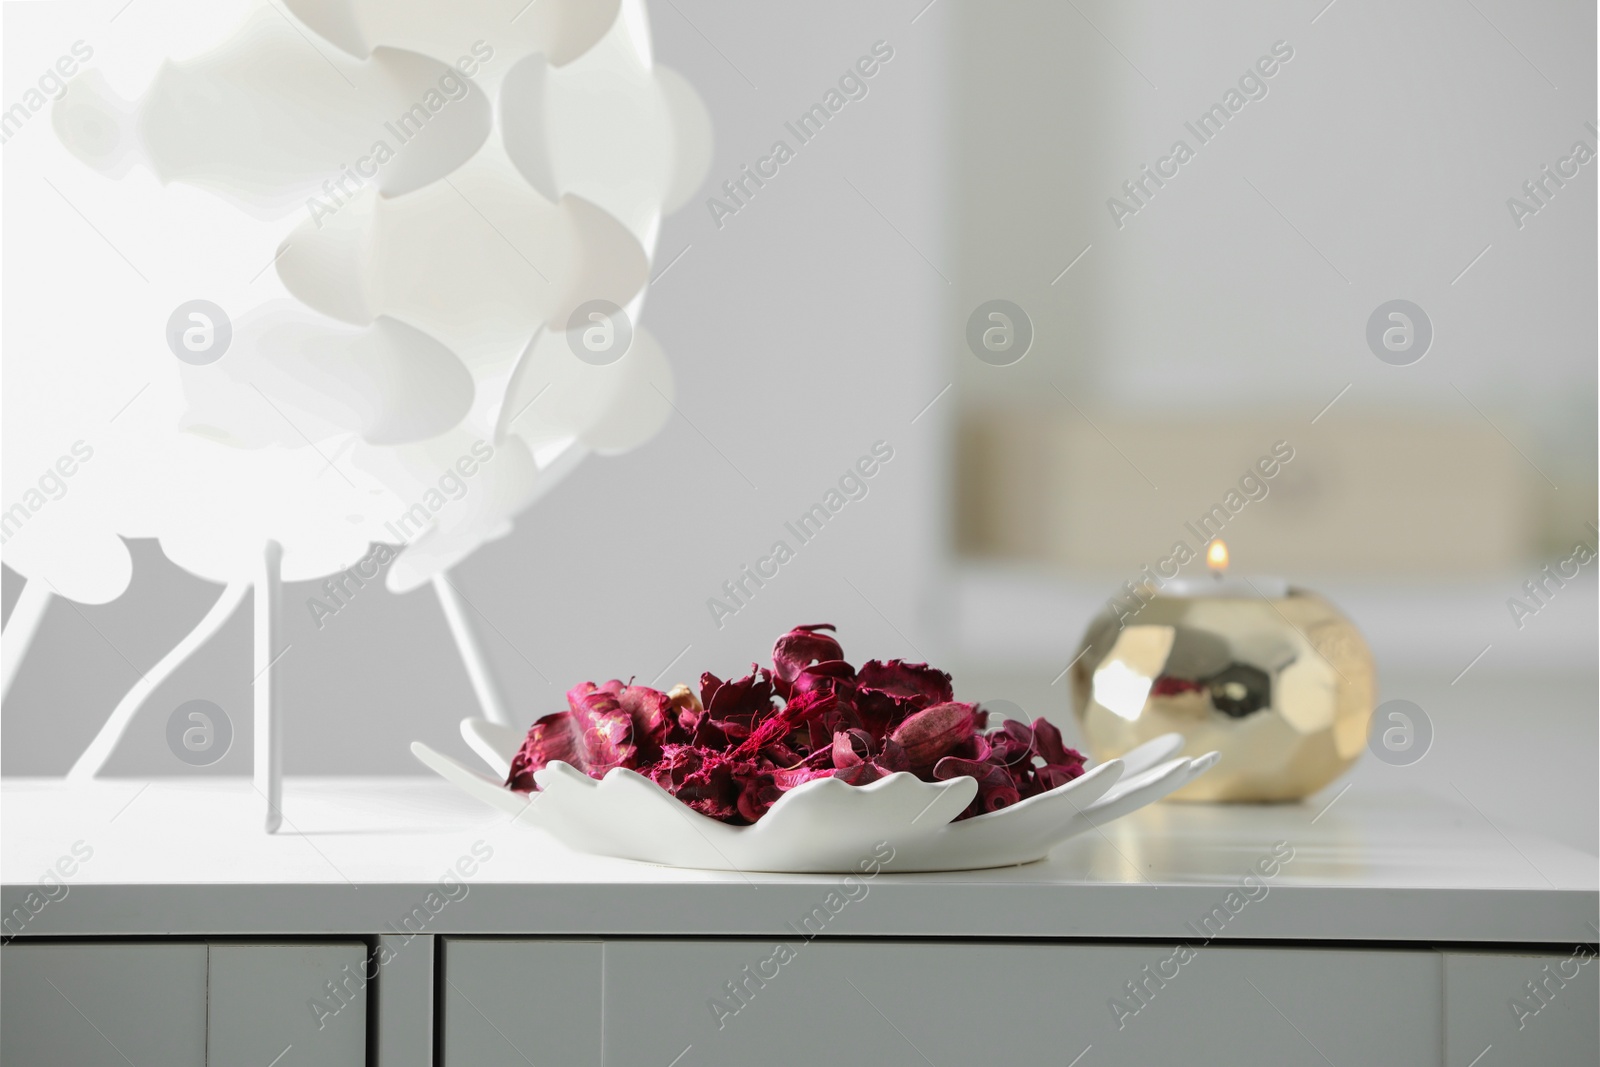 Photo of Plate with aromatic potpourri, lamp and burning candle on white chest of drawers in room